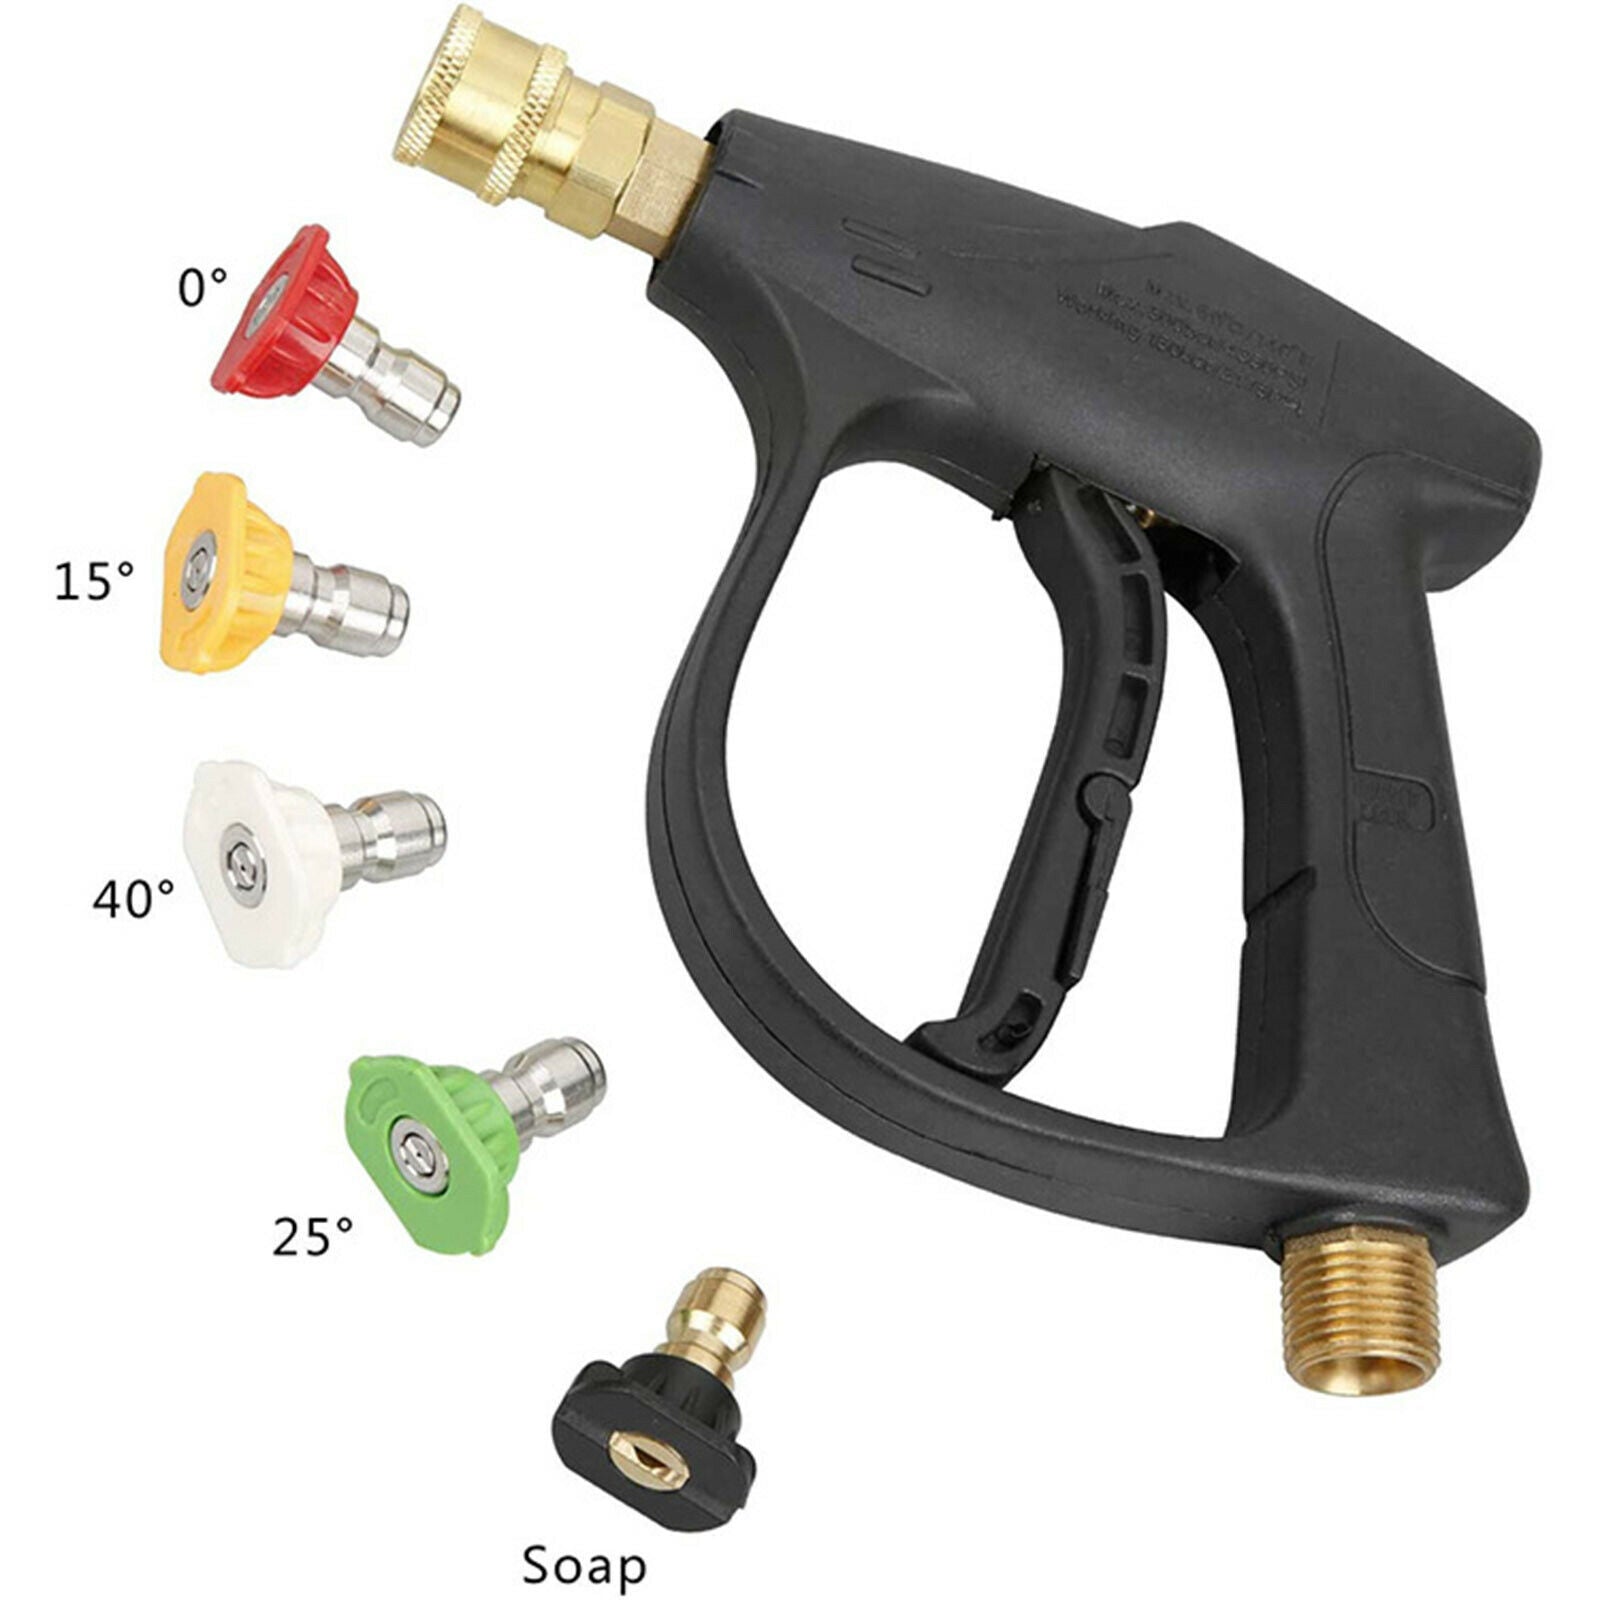 High Pressure Washer Gun 3000 PSI with 5 Nozzle Car Wash Durable Kit Fittings